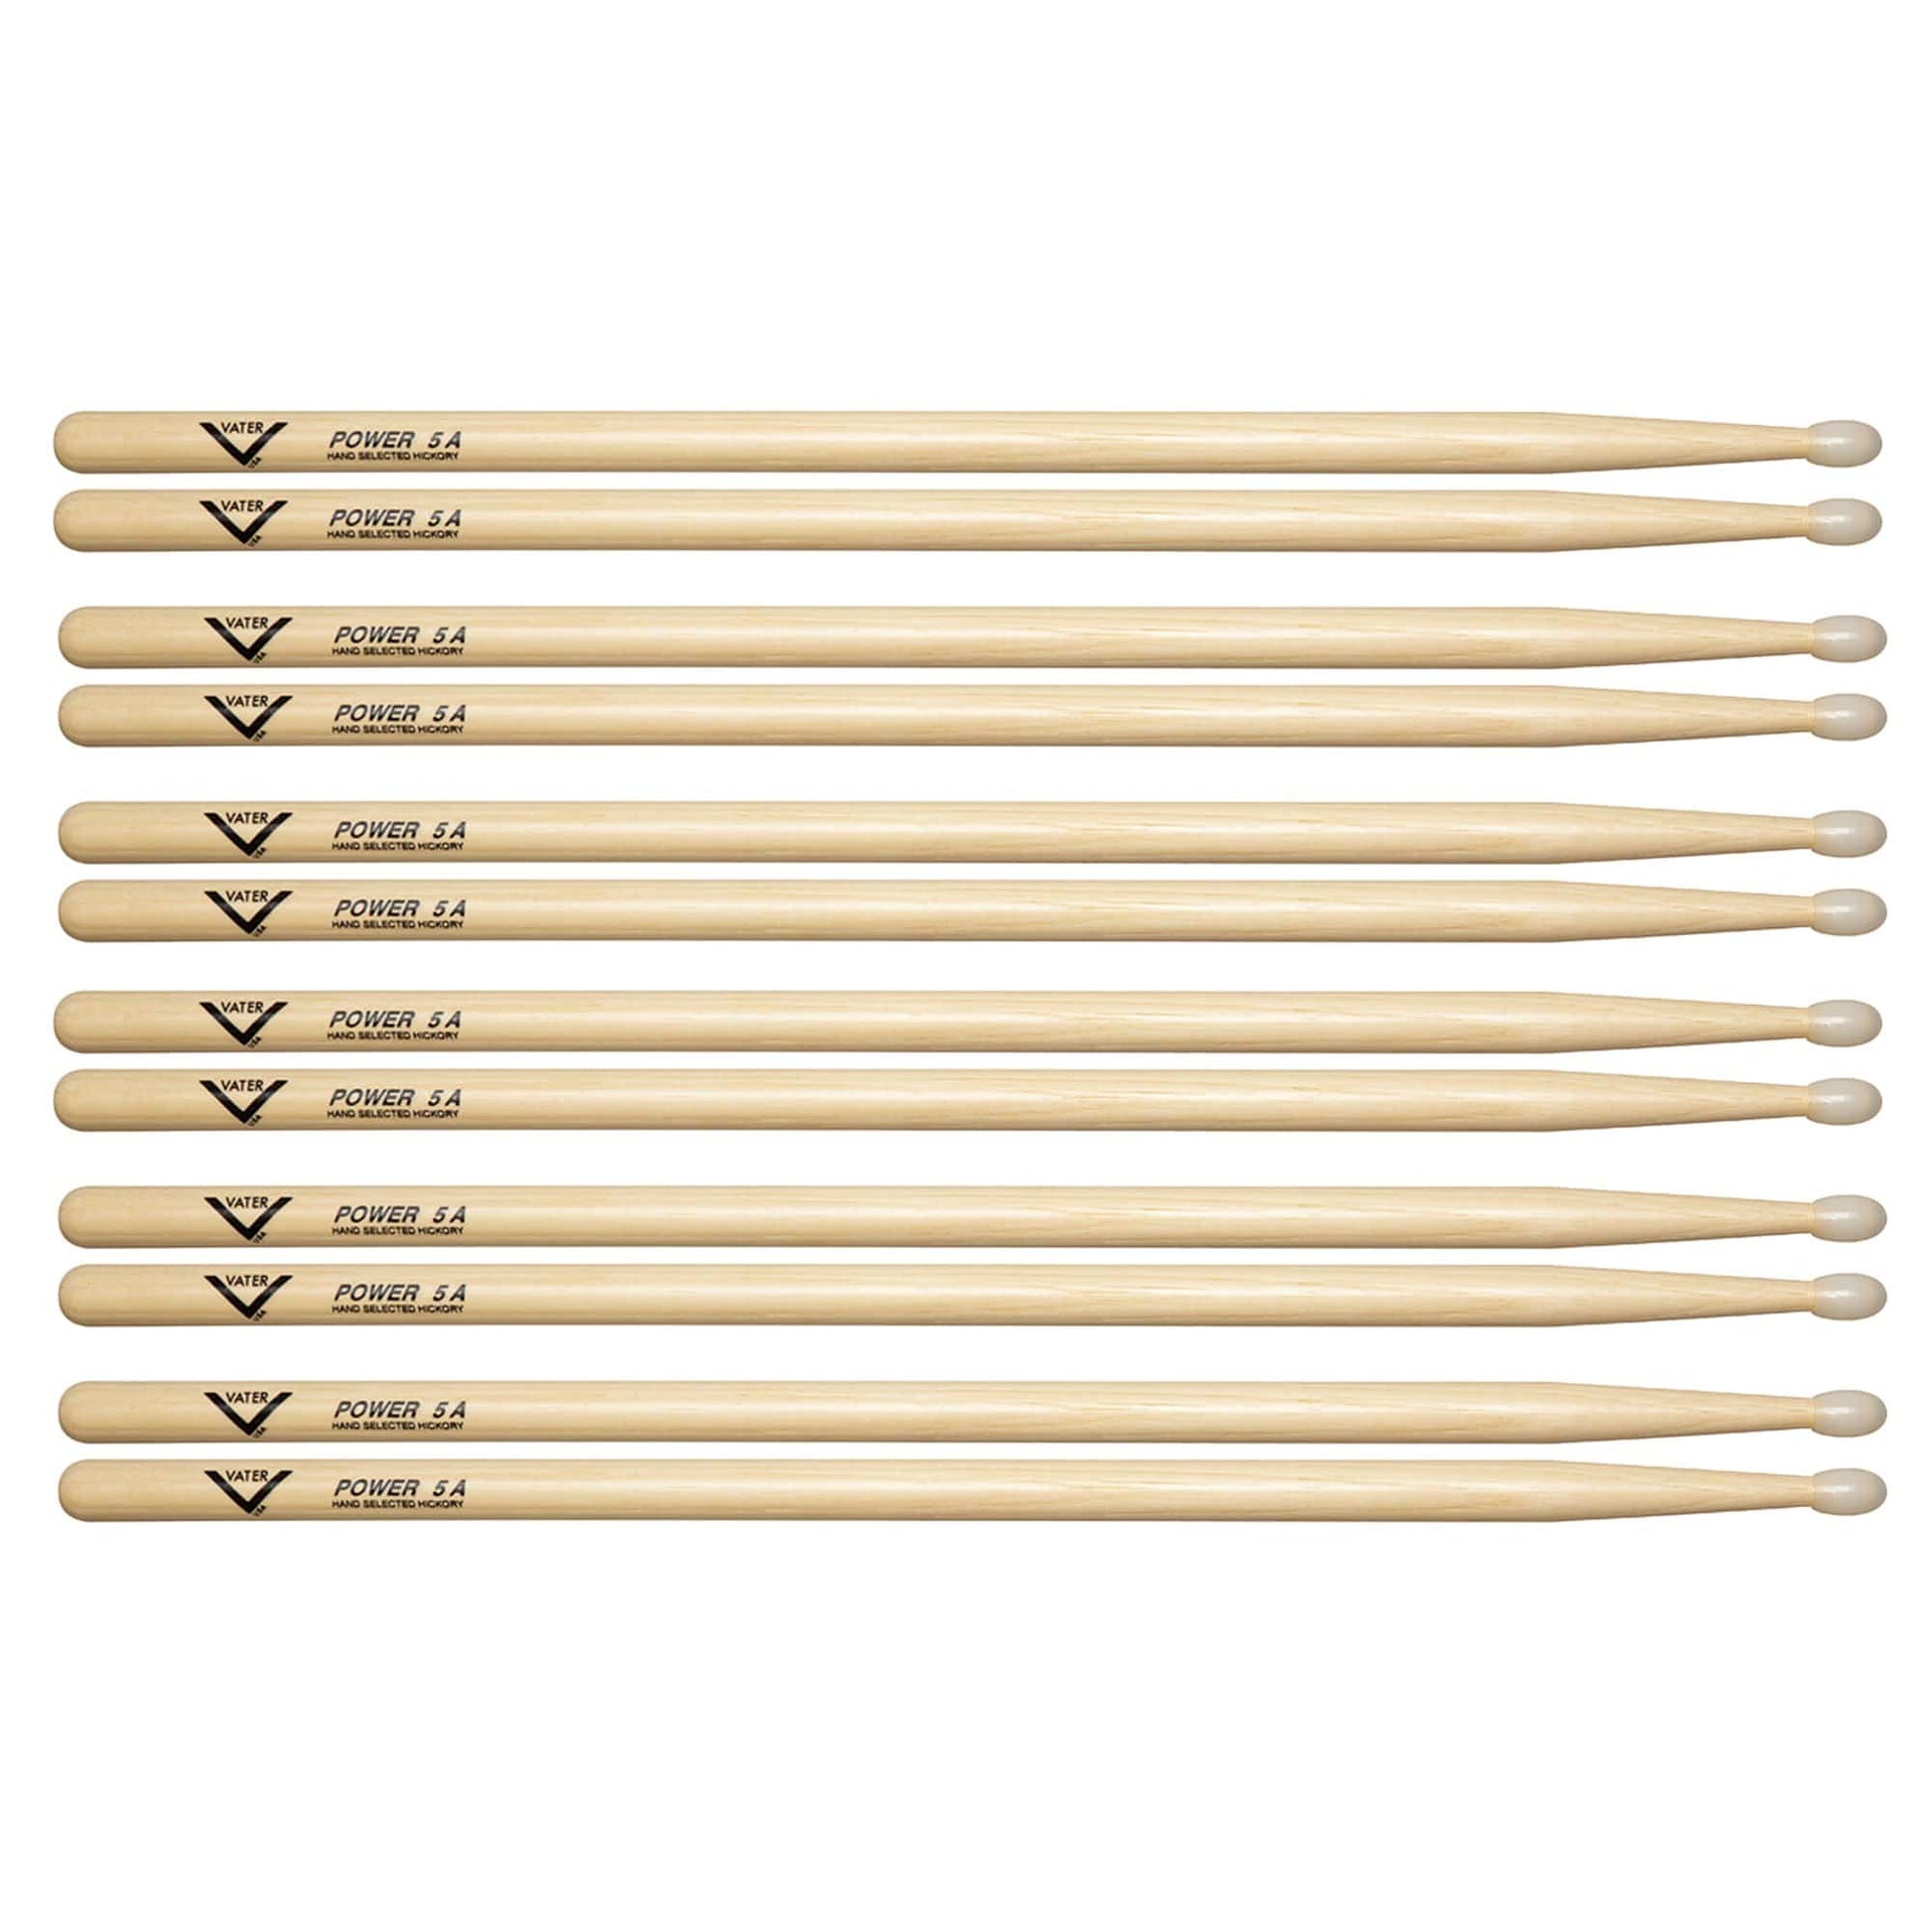 Vater Hickory Power 5A Nylon Tip Drum Sticks (6 Pair Bundle) Drums and Percussion / Parts and Accessories / Drum Sticks and Mallets